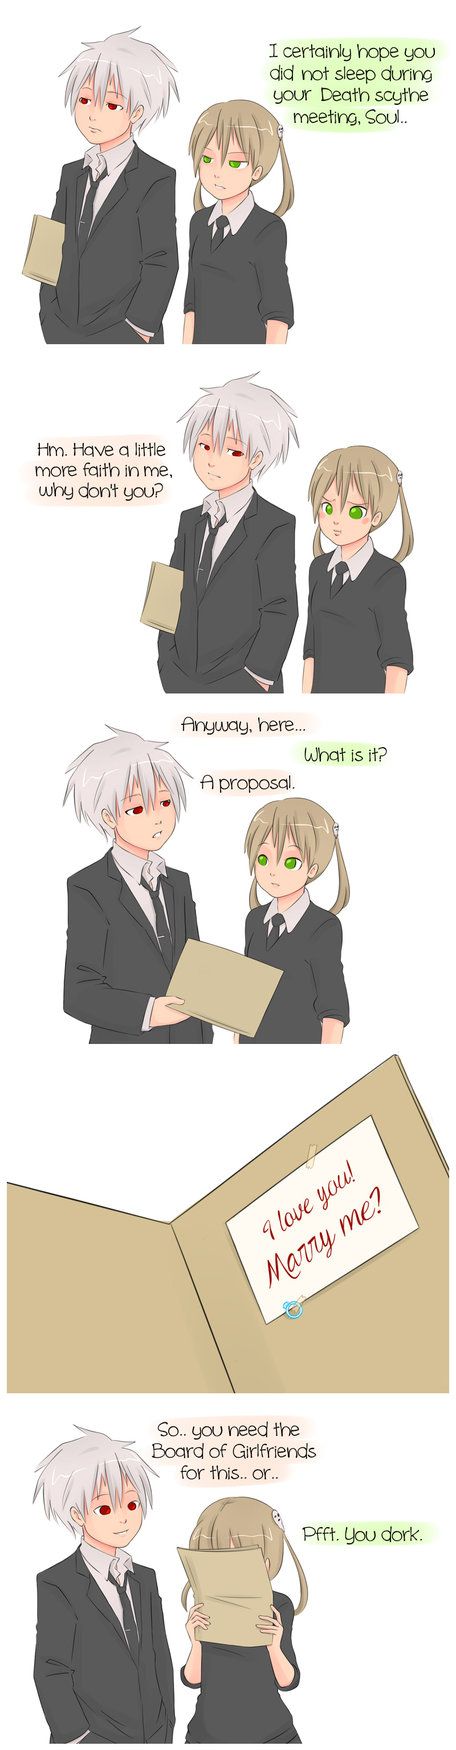 I just started watching Soul Eater but I already ship Maka and Soul and this is so cute ♥